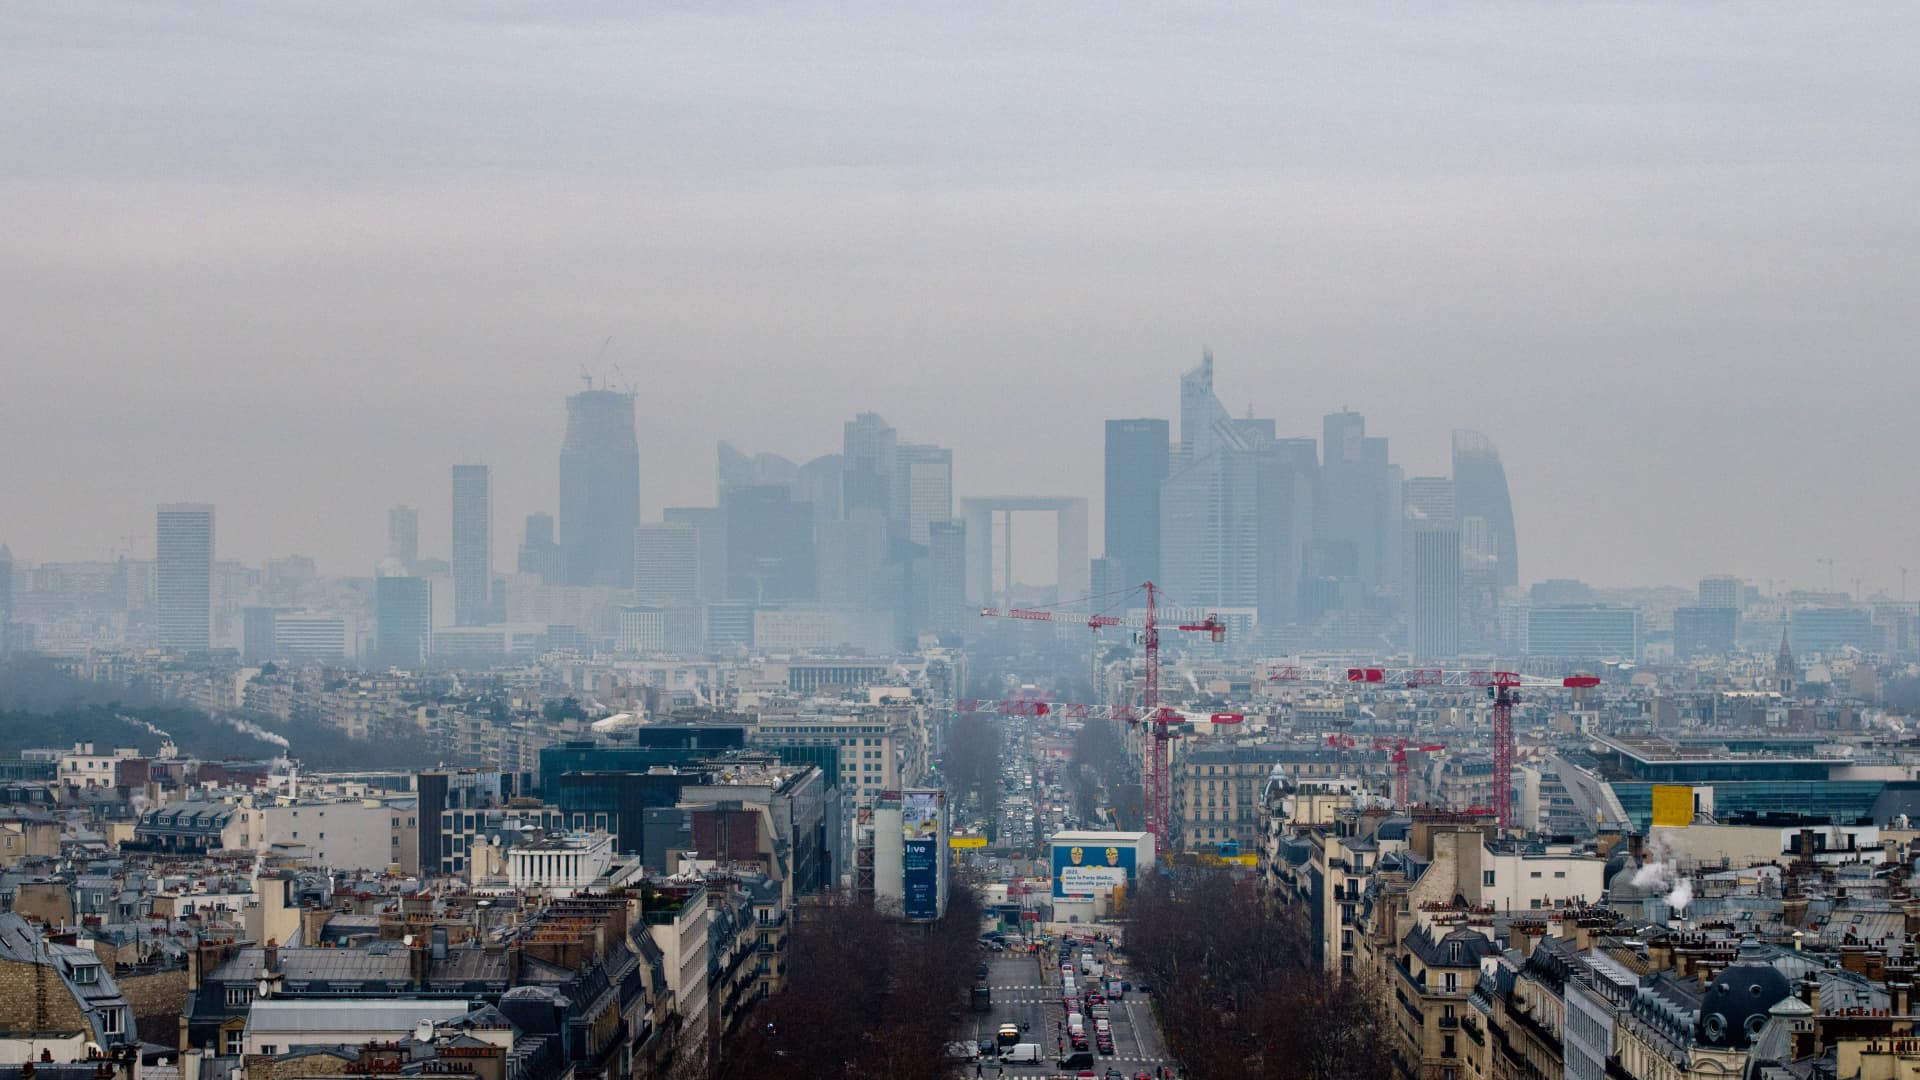 The skyline from the Arc de Triomphe in Paris, France.